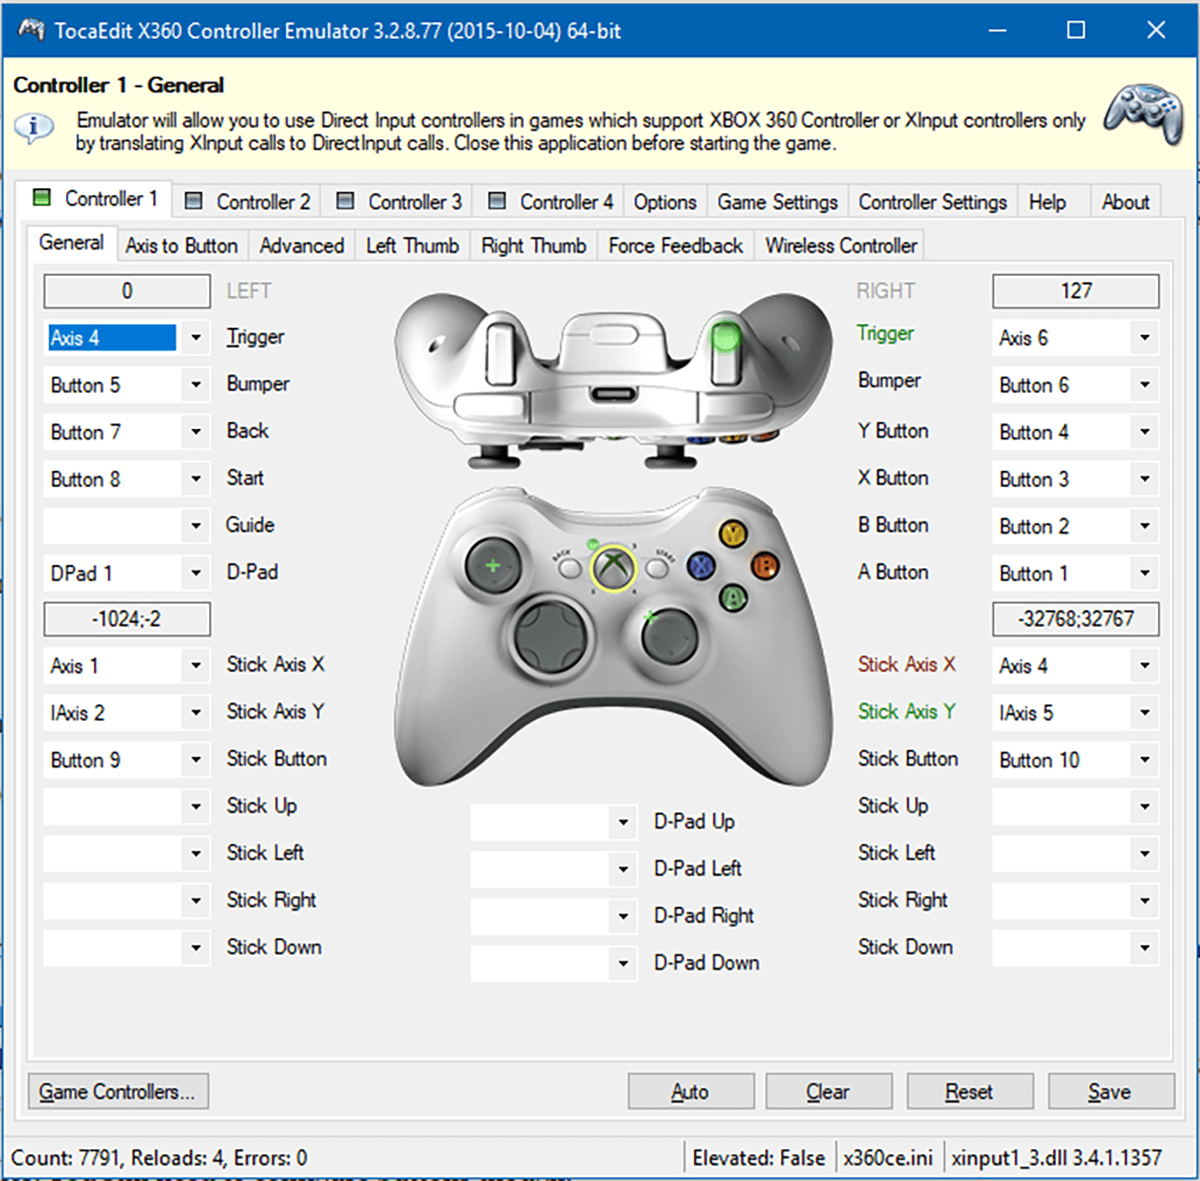 key mapping software for controllers